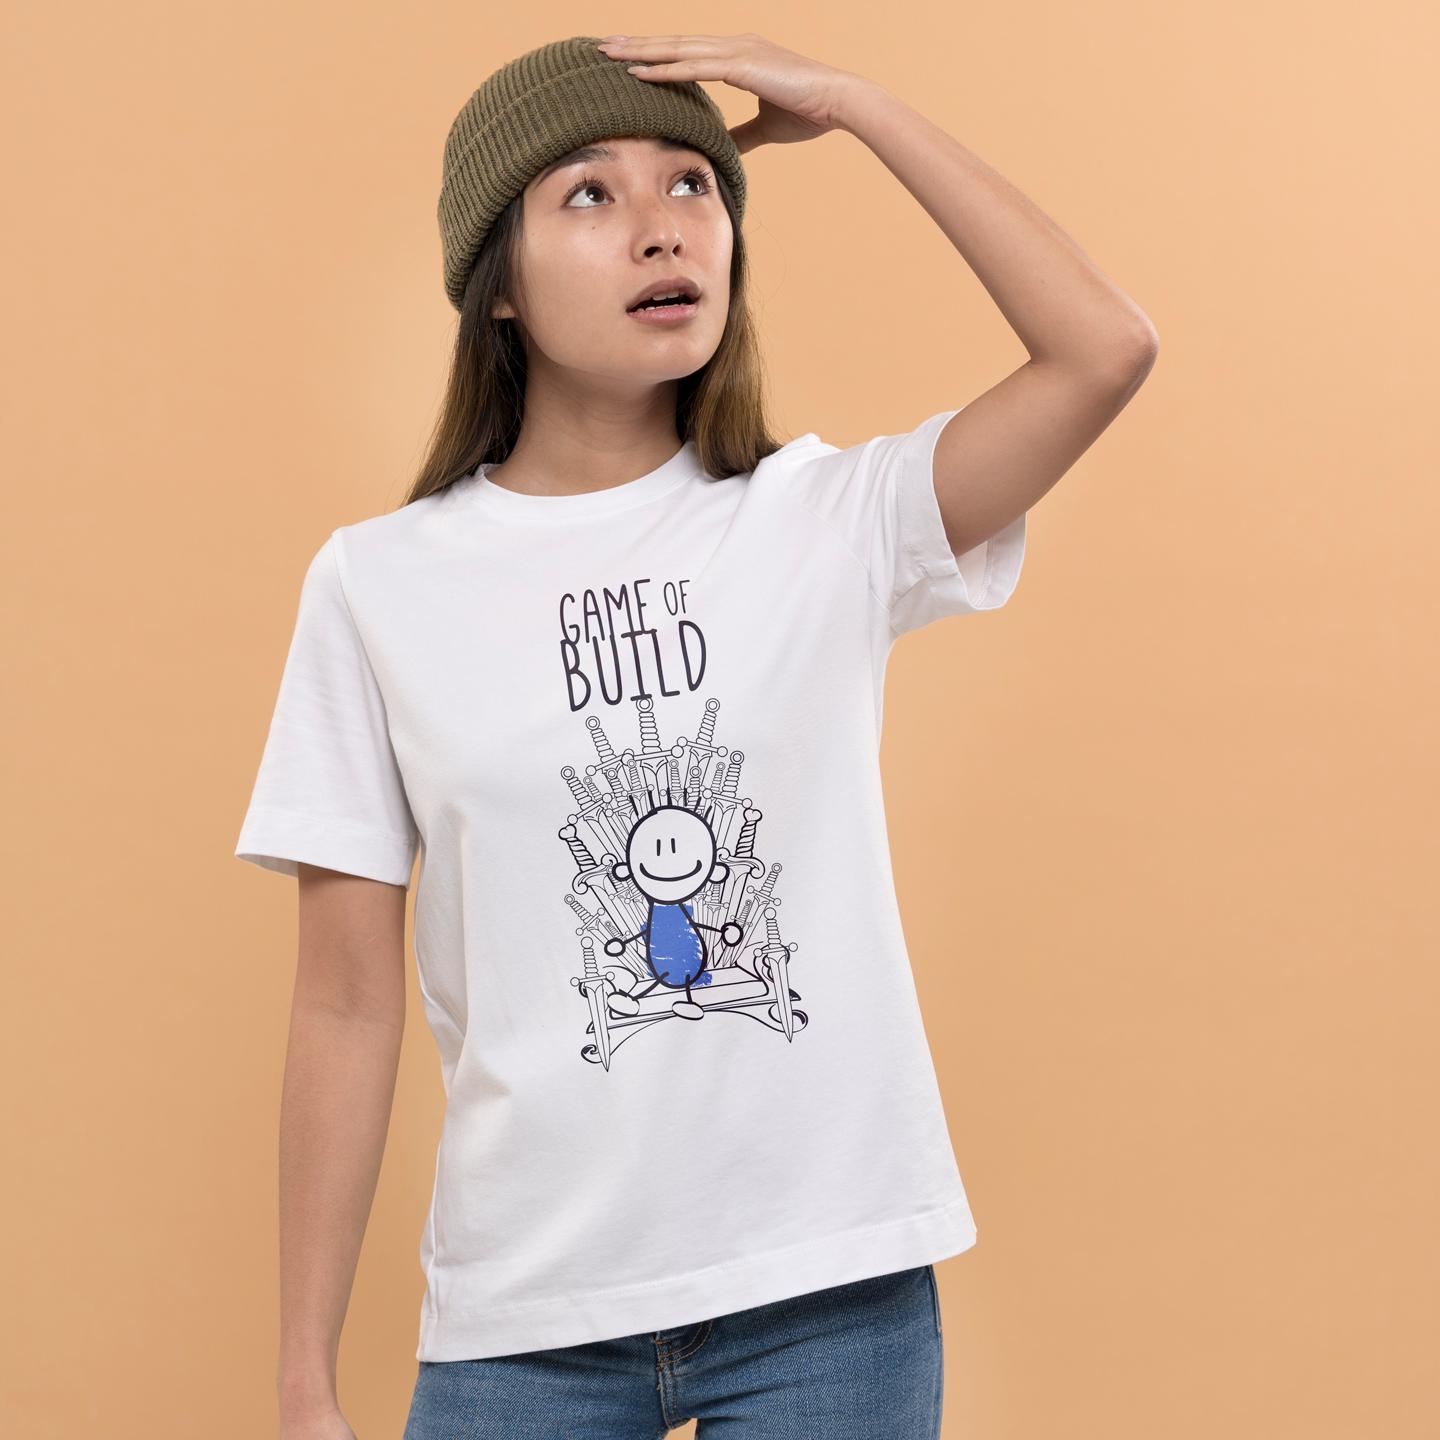 T-SHIRT - GAME OF BUILD - WOMAN